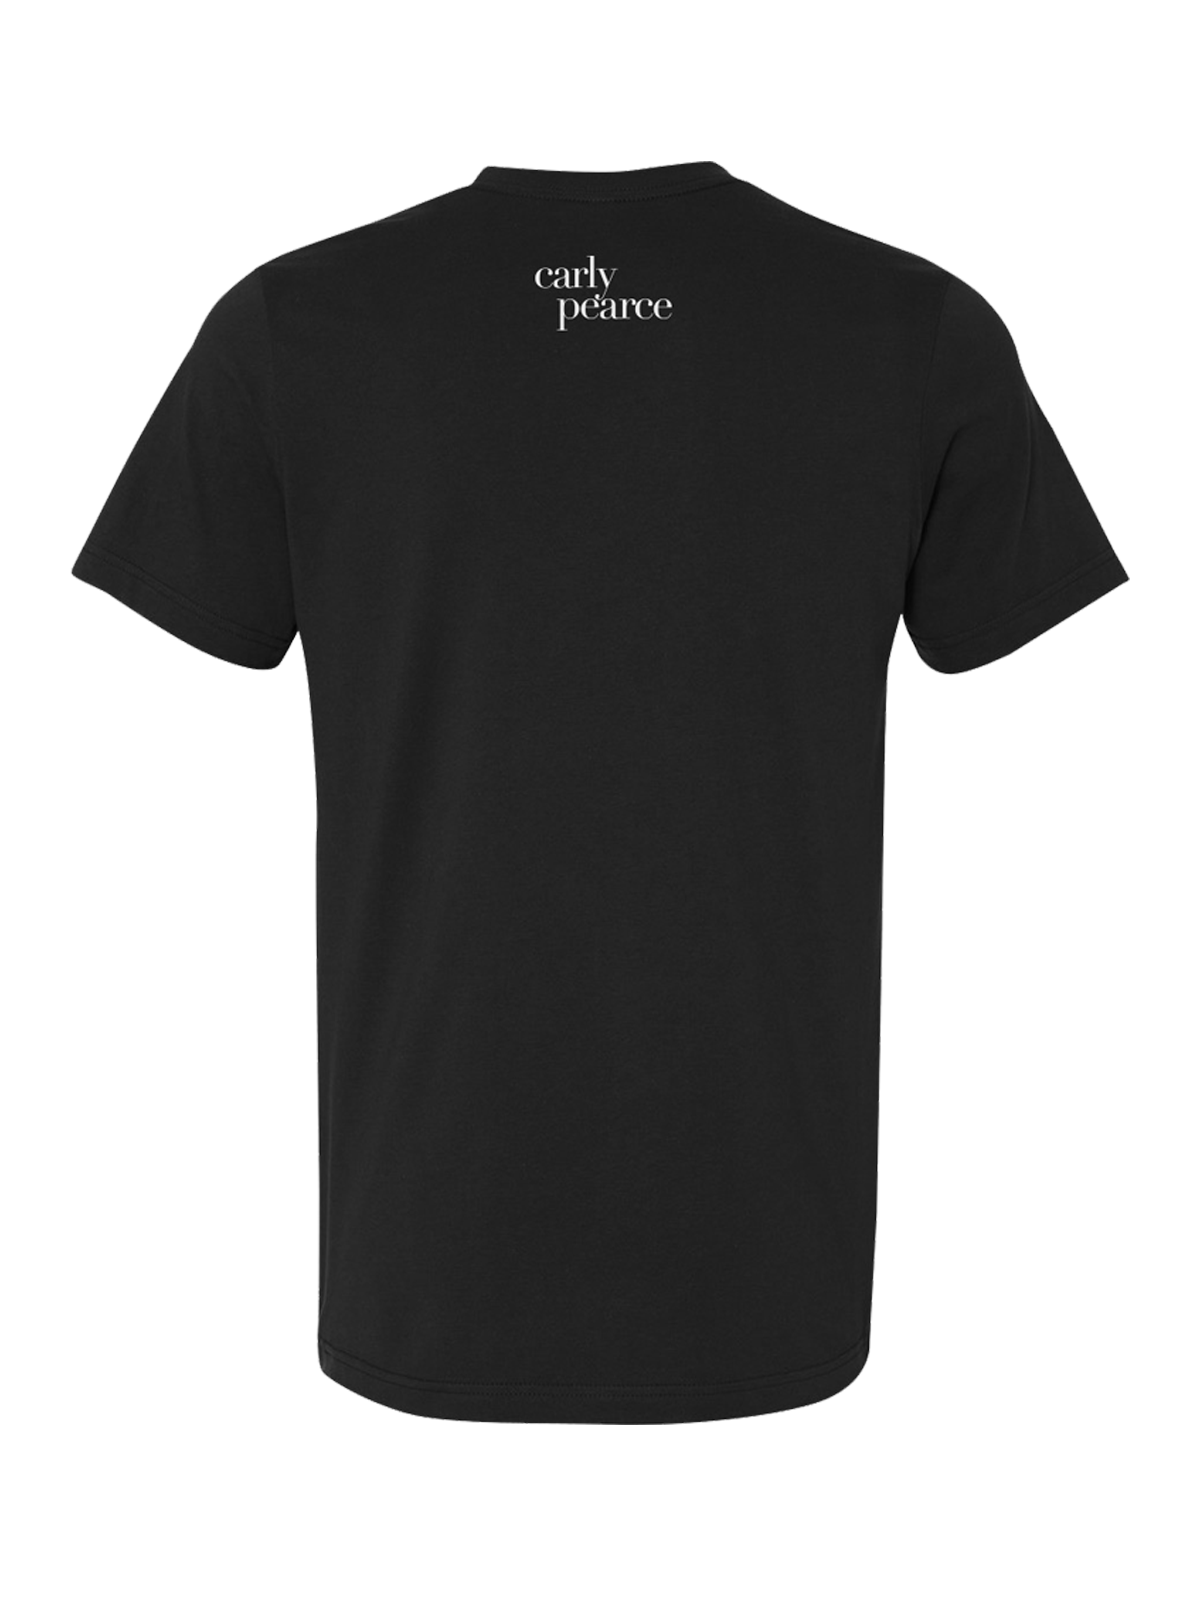 Give yourself same grace black unisex tee back Carly Pearce